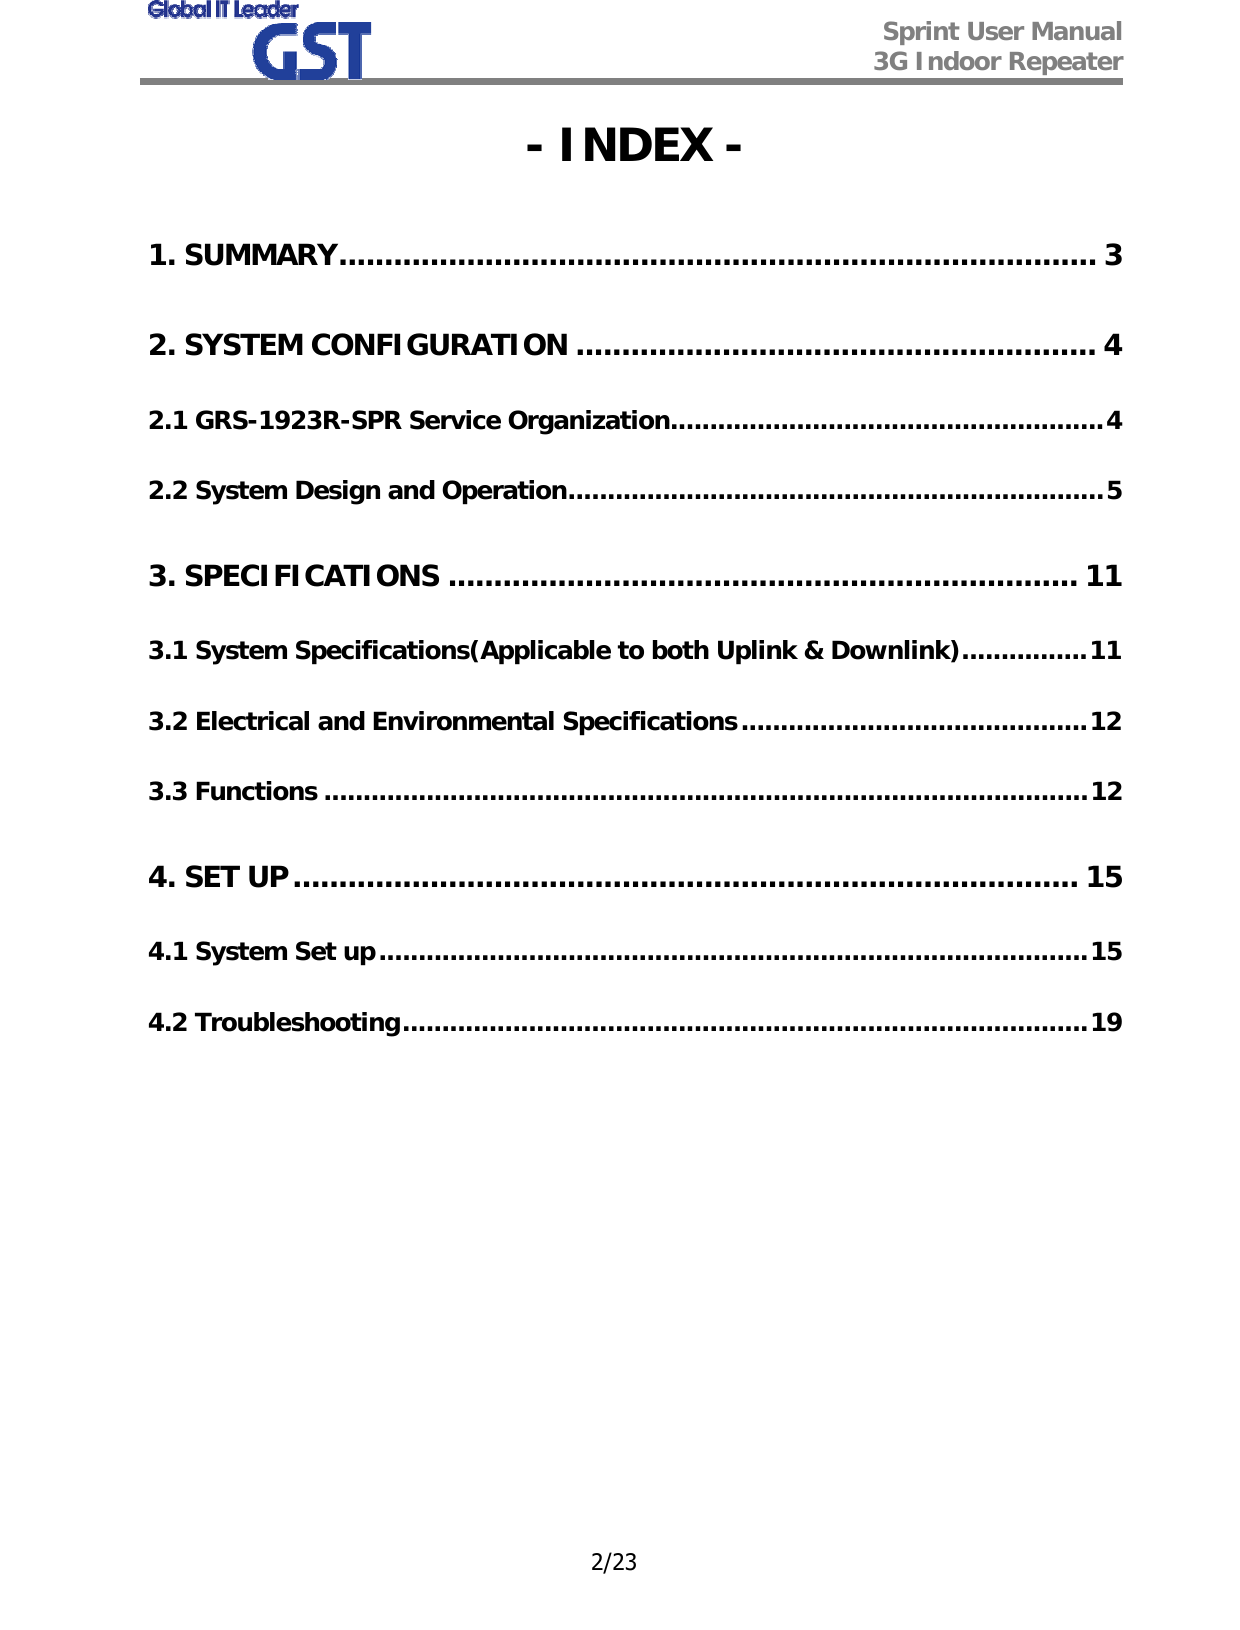  Sprint User Manual 3G Indoor Repeater   2/23 - INDEX - 1. SUMMARY................................................................................... 3 2. SYSTEM CONFIGURATION ......................................................... 4 2.1 GRS-1923R-SPR Service Organization.......................................................4 2.2 System Design and Operation....................................................................5 3. SPECIFICATIONS ..................................................................... 11 3.1 System Specifications(Applicable to both Uplink &amp; Downlink)................11 3.2 Electrical and Environmental Specifications............................................12 3.3 Functions .................................................................................................12 4. SET UP...................................................................................... 15 4.1 System Set up..........................................................................................15 4.2 Troubleshooting.......................................................................................19            